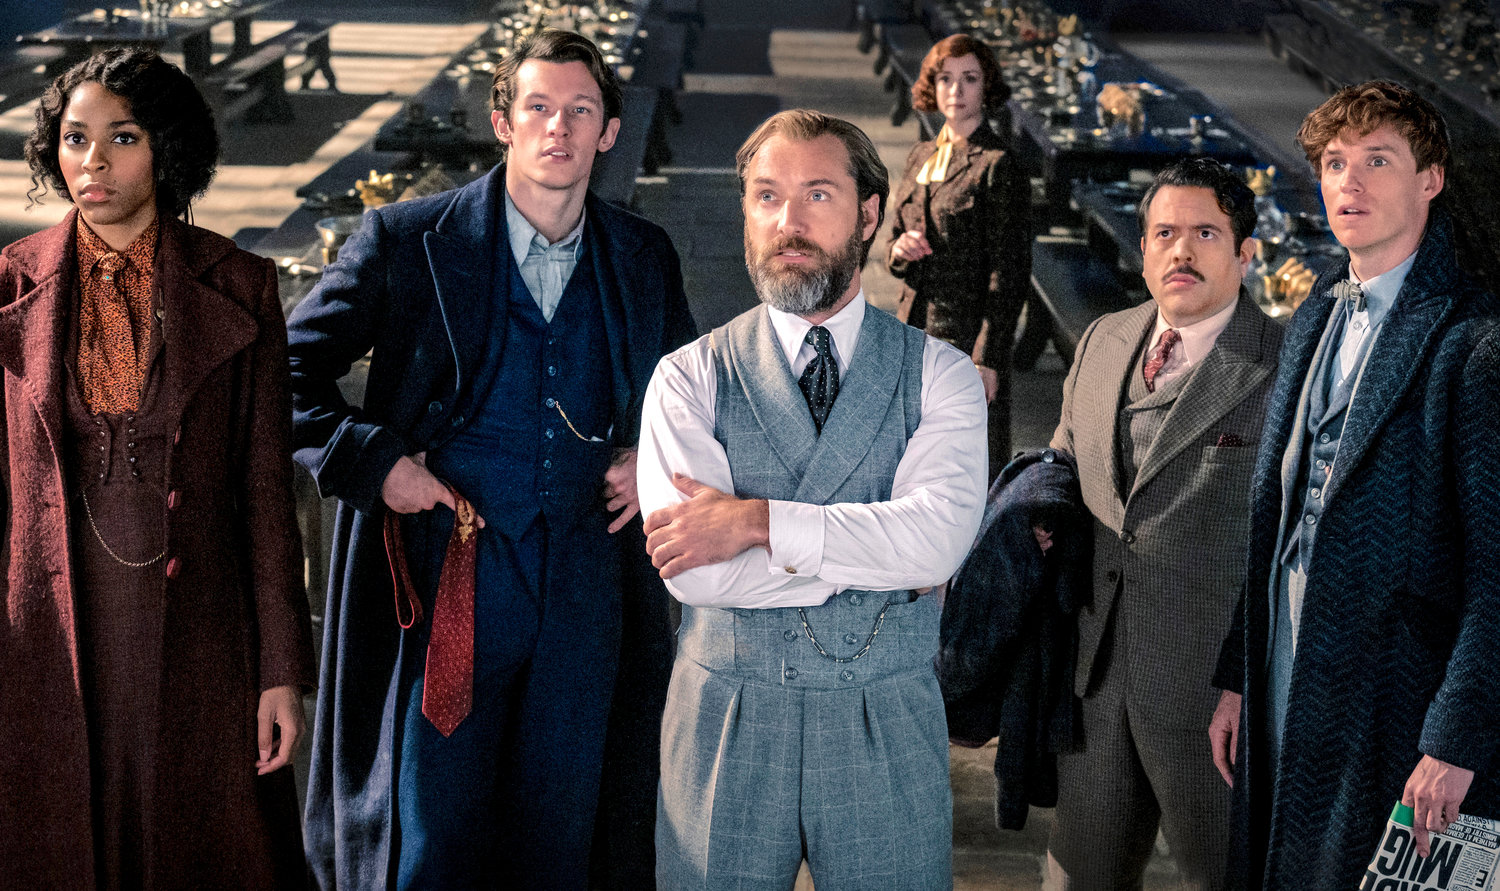 Don’t waste your time — From left, Jessica Williams, Callum Turner, Jude Law, Fionna Glascott, Dan Fogler and Eddie Redmayne in a scene from “Fantastic Beasts: The Secrets of Dumbledore.” “Do not go see it. Do not waste your time, money or effort, even if you consider yourself the biggest Harry Potter fan on the planet.”